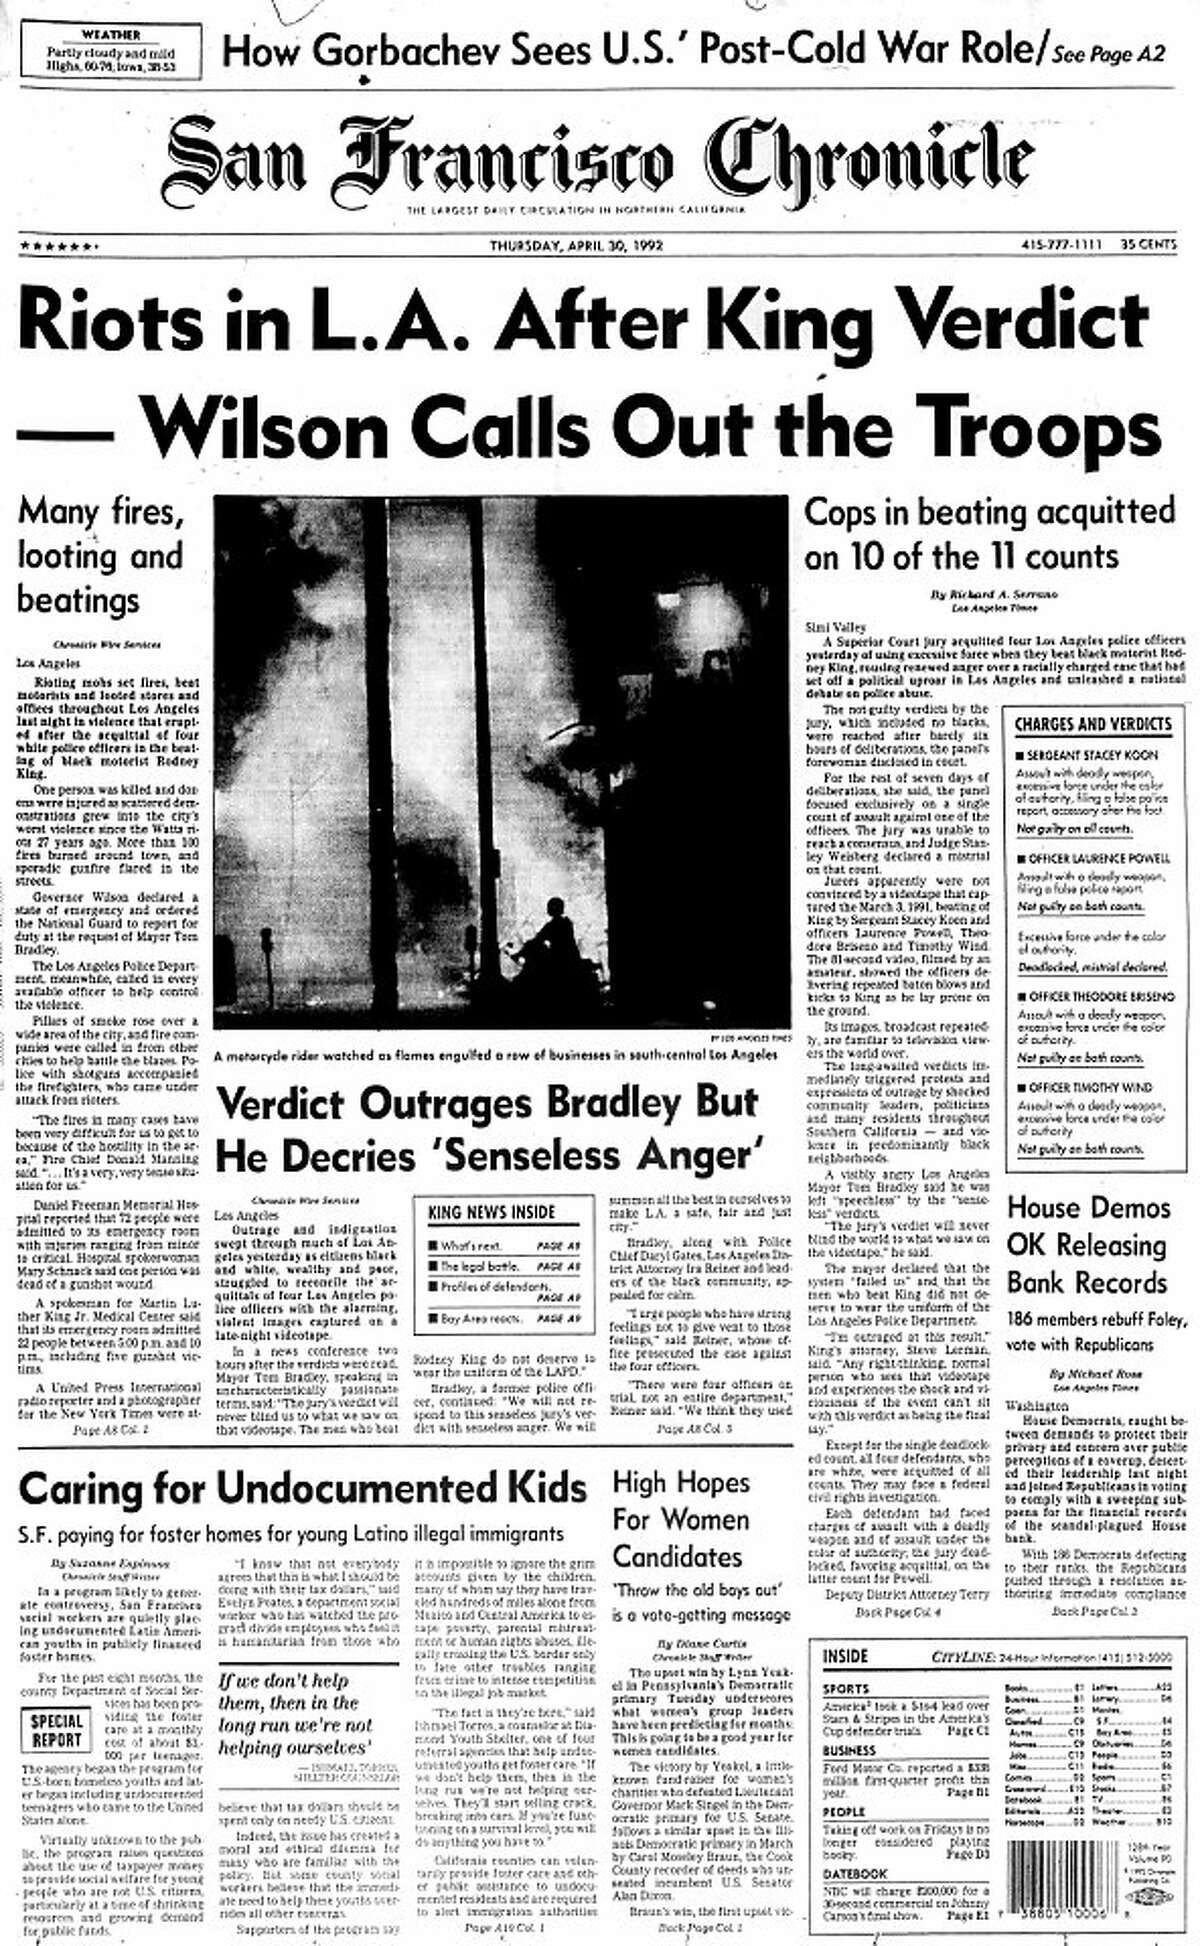 After an all-white jury acquits three police officers and one sergeant accused in the videotaped beating Rodney King, a three-day uprising in Los Angeles results in more than 50 people killed, more than 2,000 injured and 8,000 arrested. Rioting mobs set fires, beat motorists and loot stores as Governor Pete Wilson declares a state of emergency and sends in the National Guard to help control the violence.